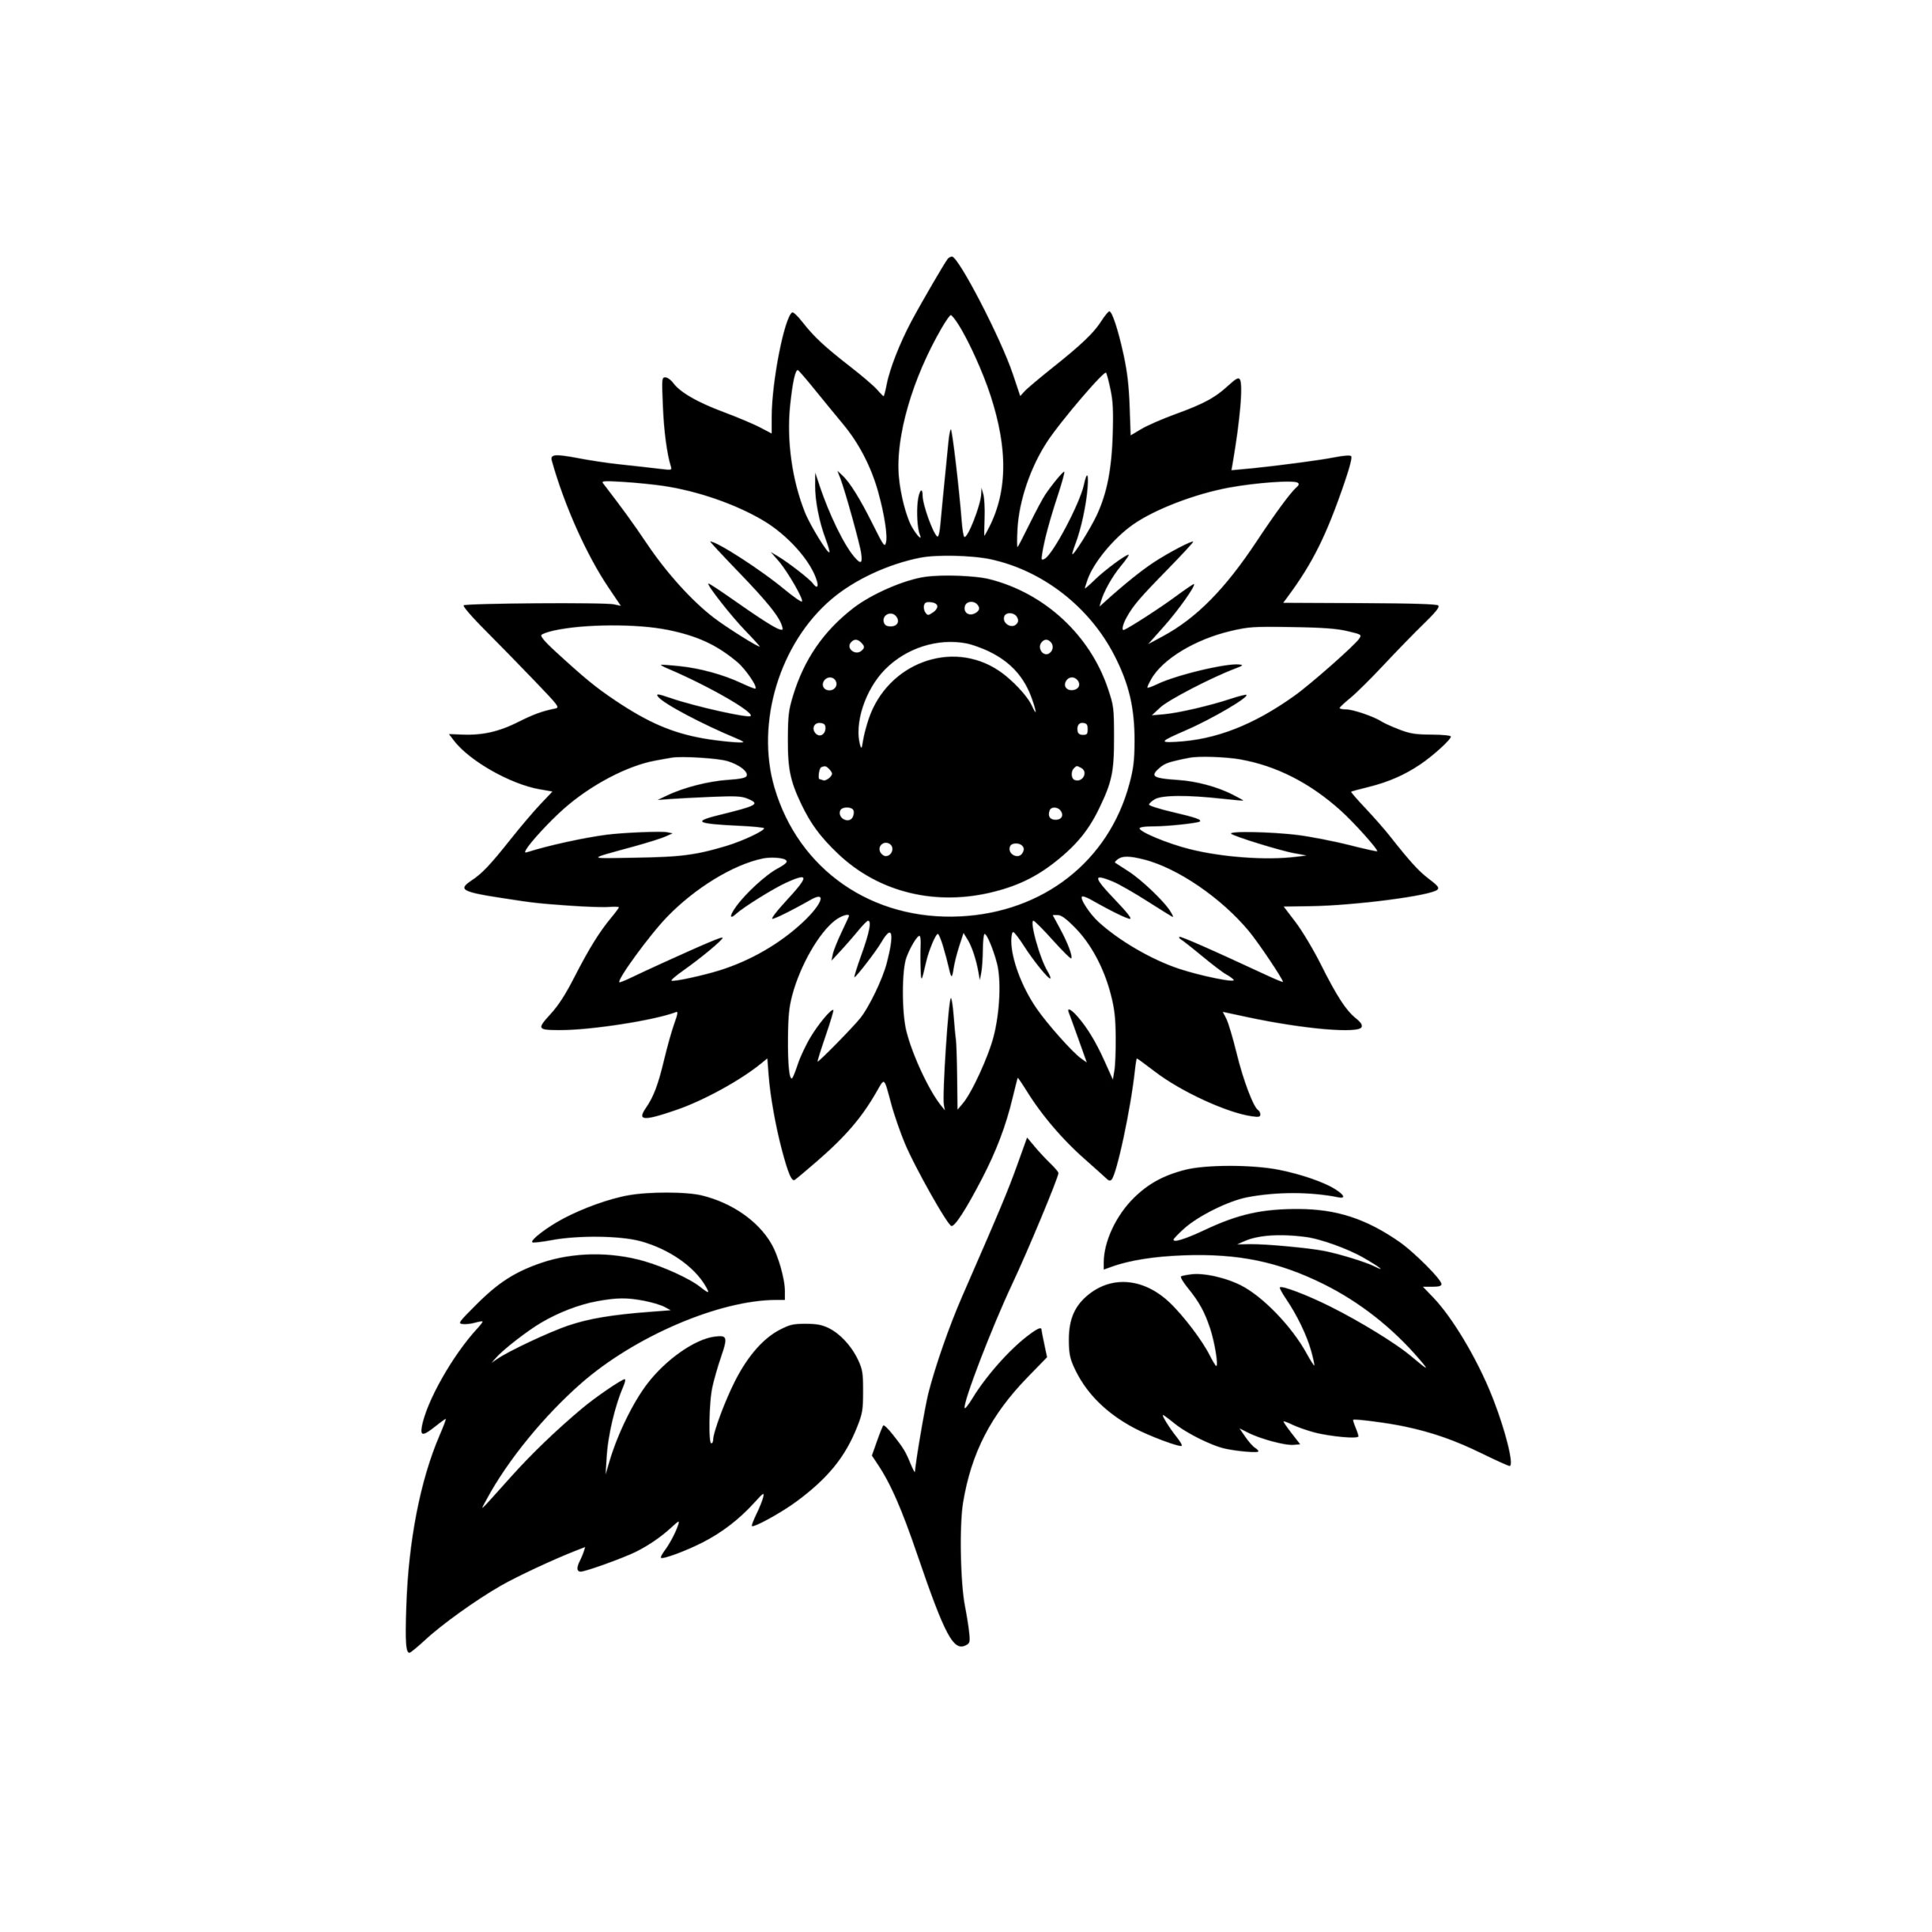 Sunflower Radiance: SVG, PNG, DXF Files for Cricut, Silhouette, Laser ...